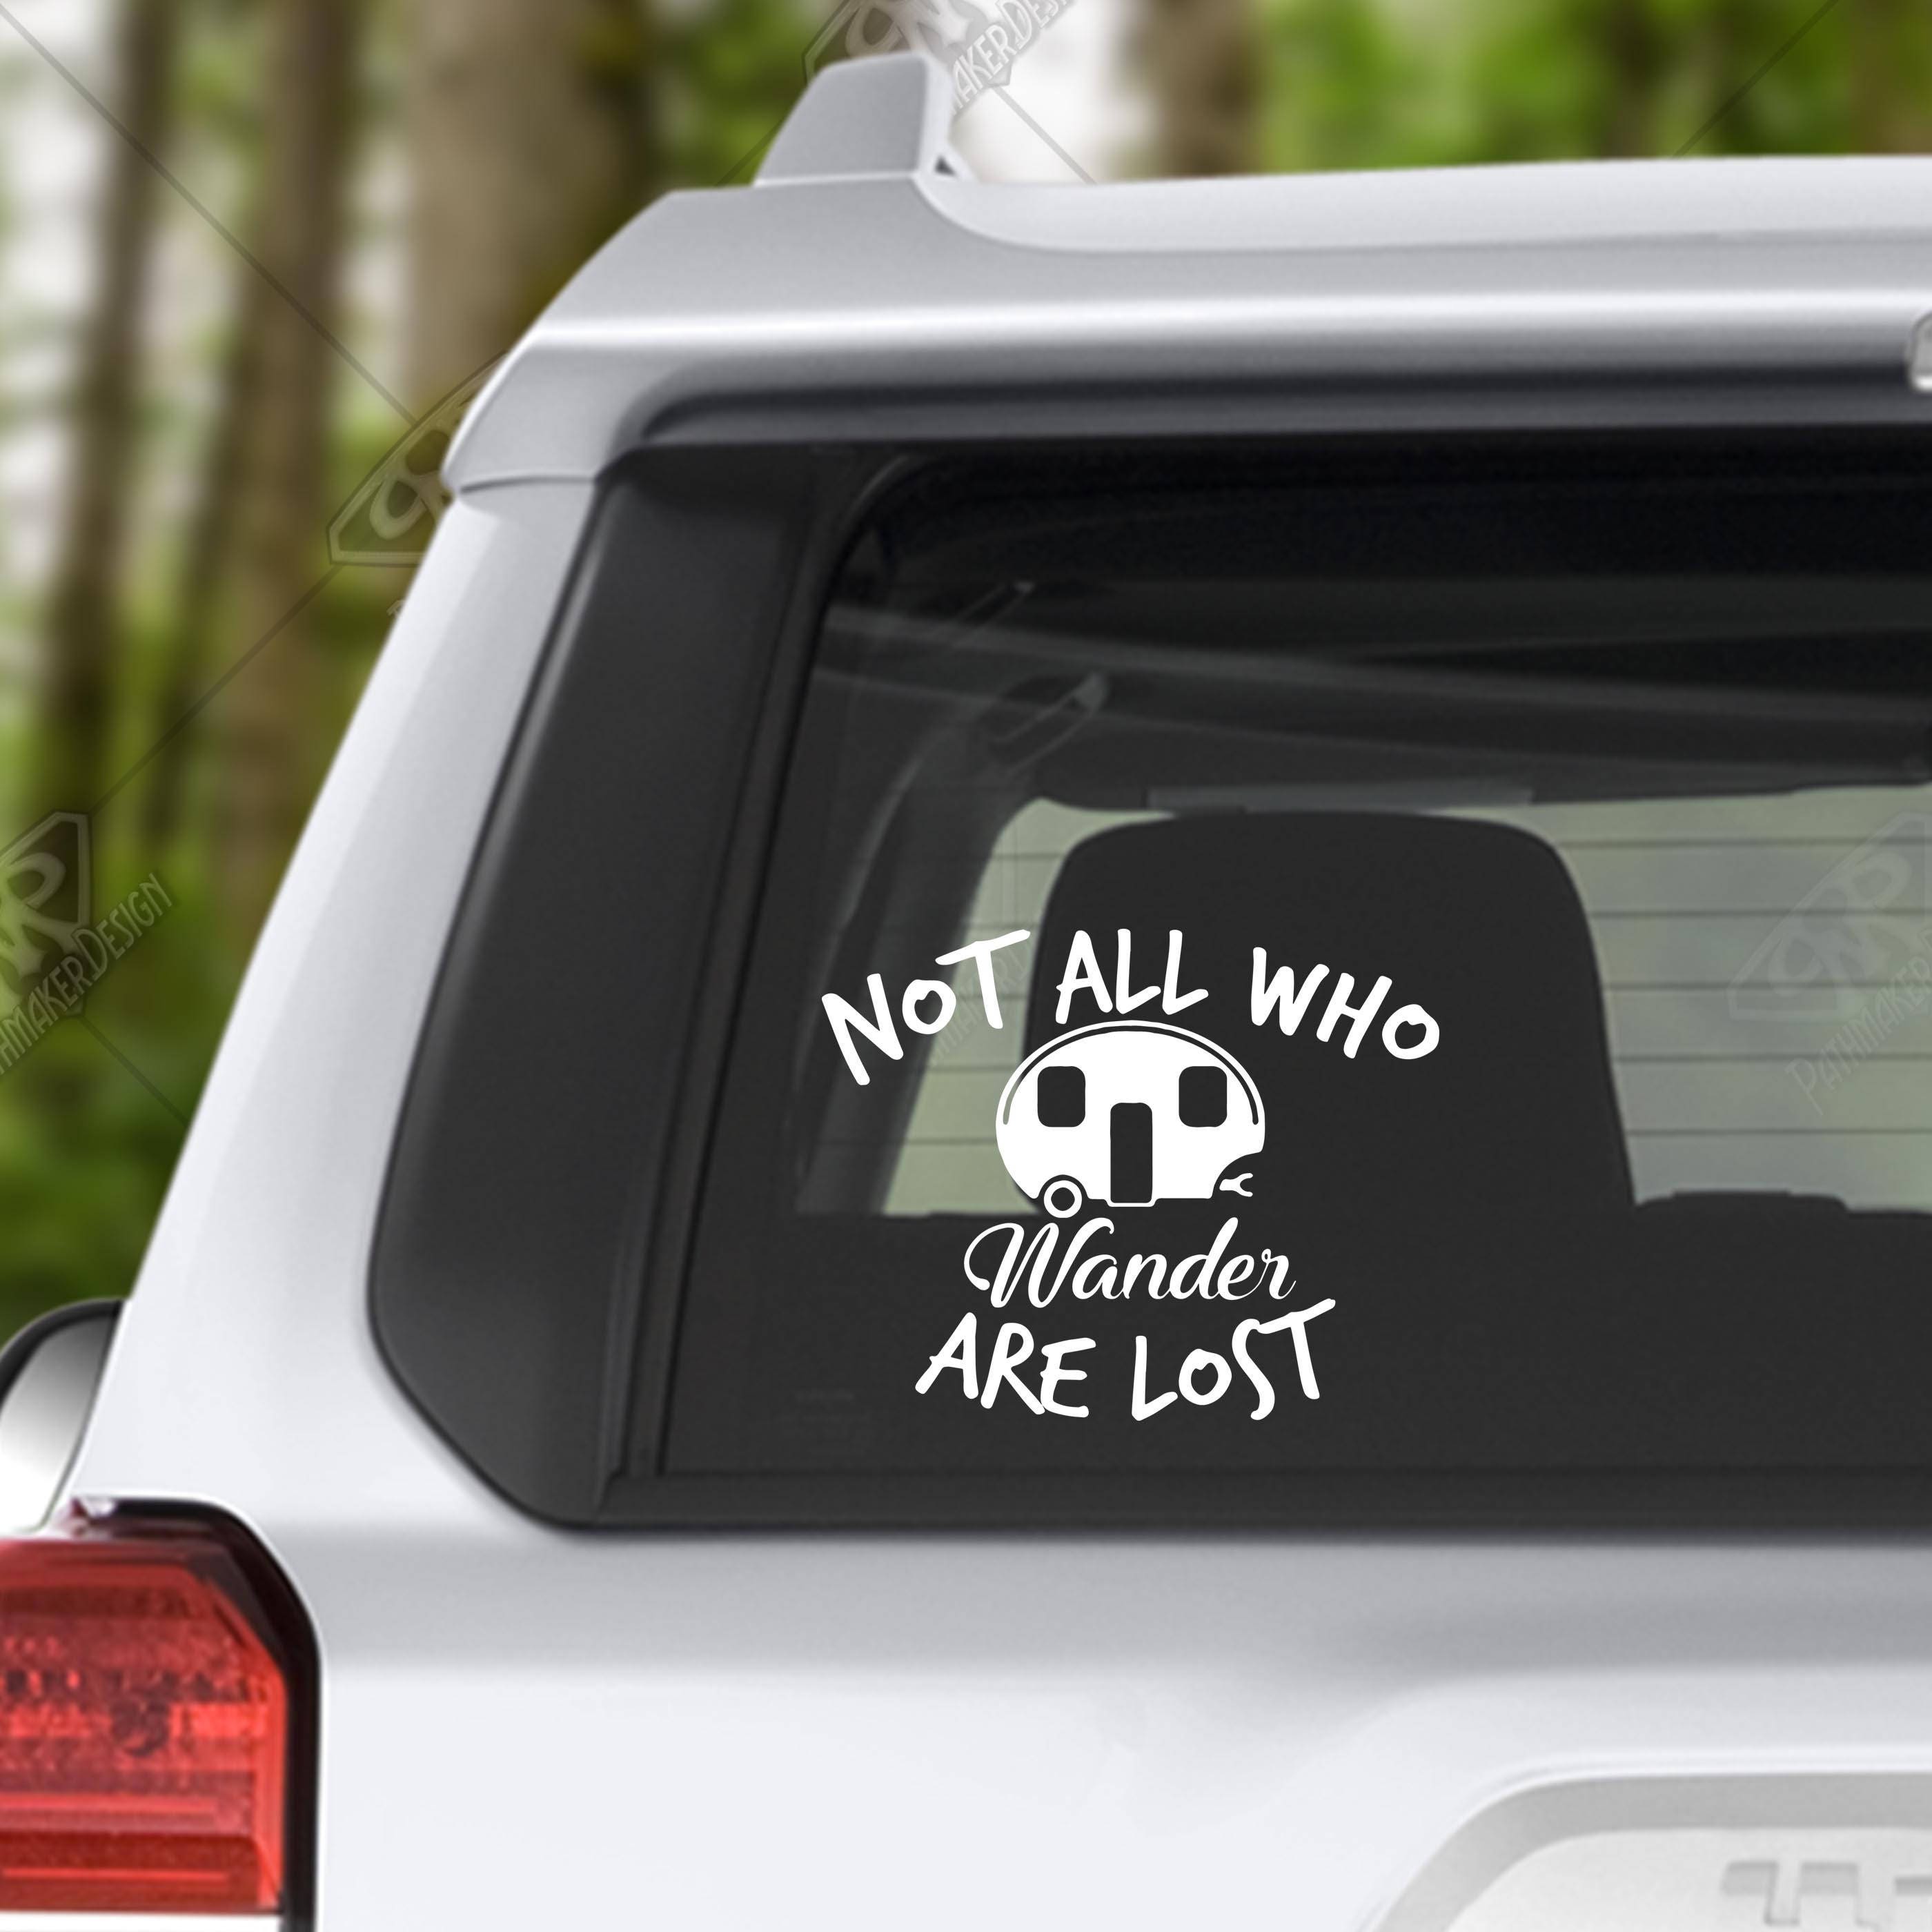 NOT ALL THOSE WHO WANDER ARE LOST Vinyl Decal Car Window Bumper Sticker Camper 